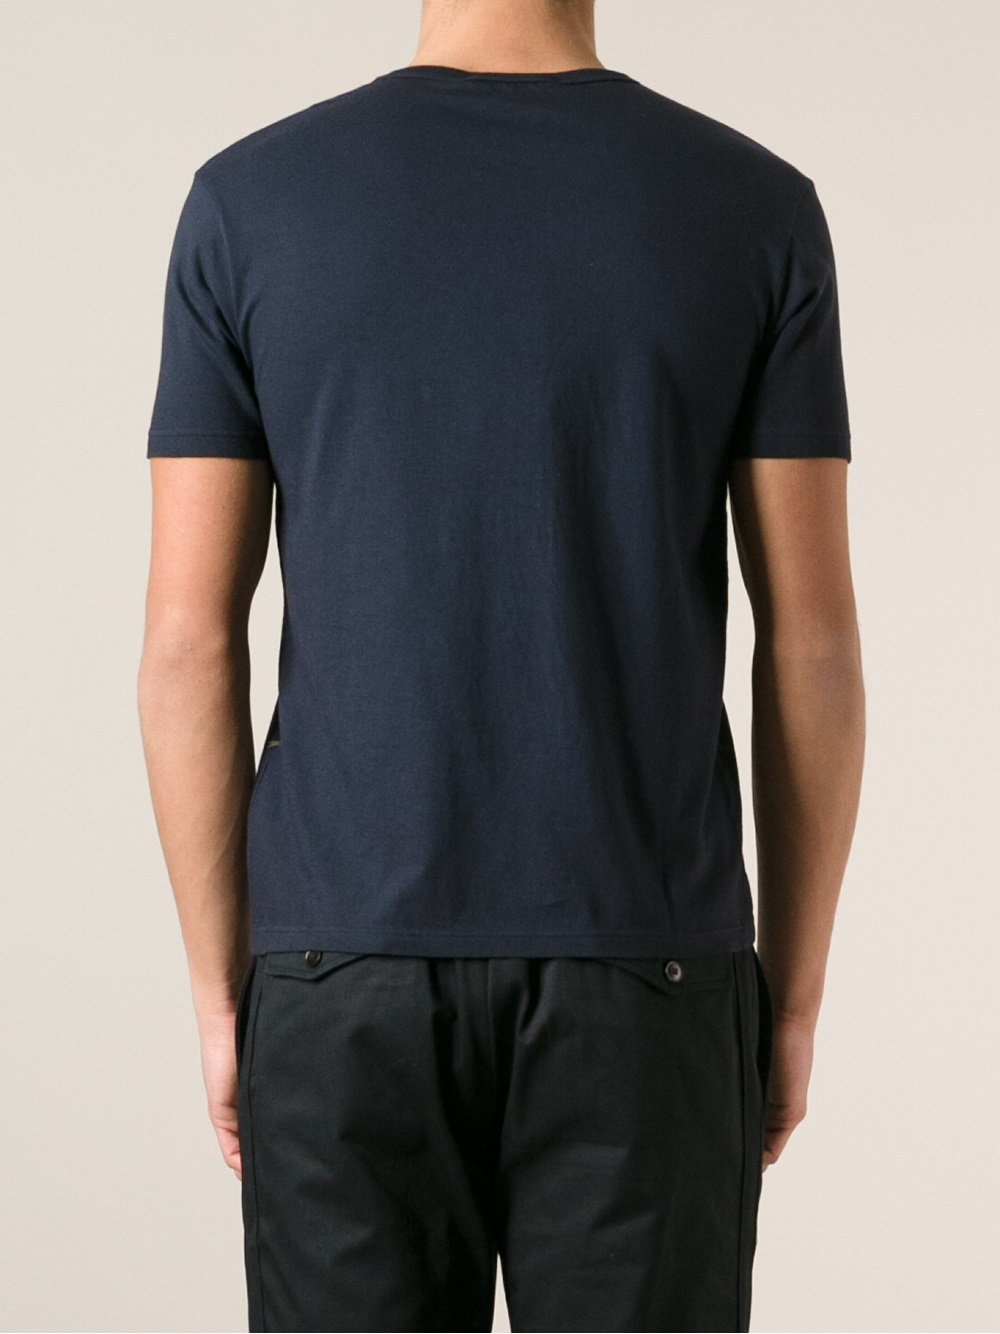 Lyst - Gucci Printed Tshirt in Blue for Men